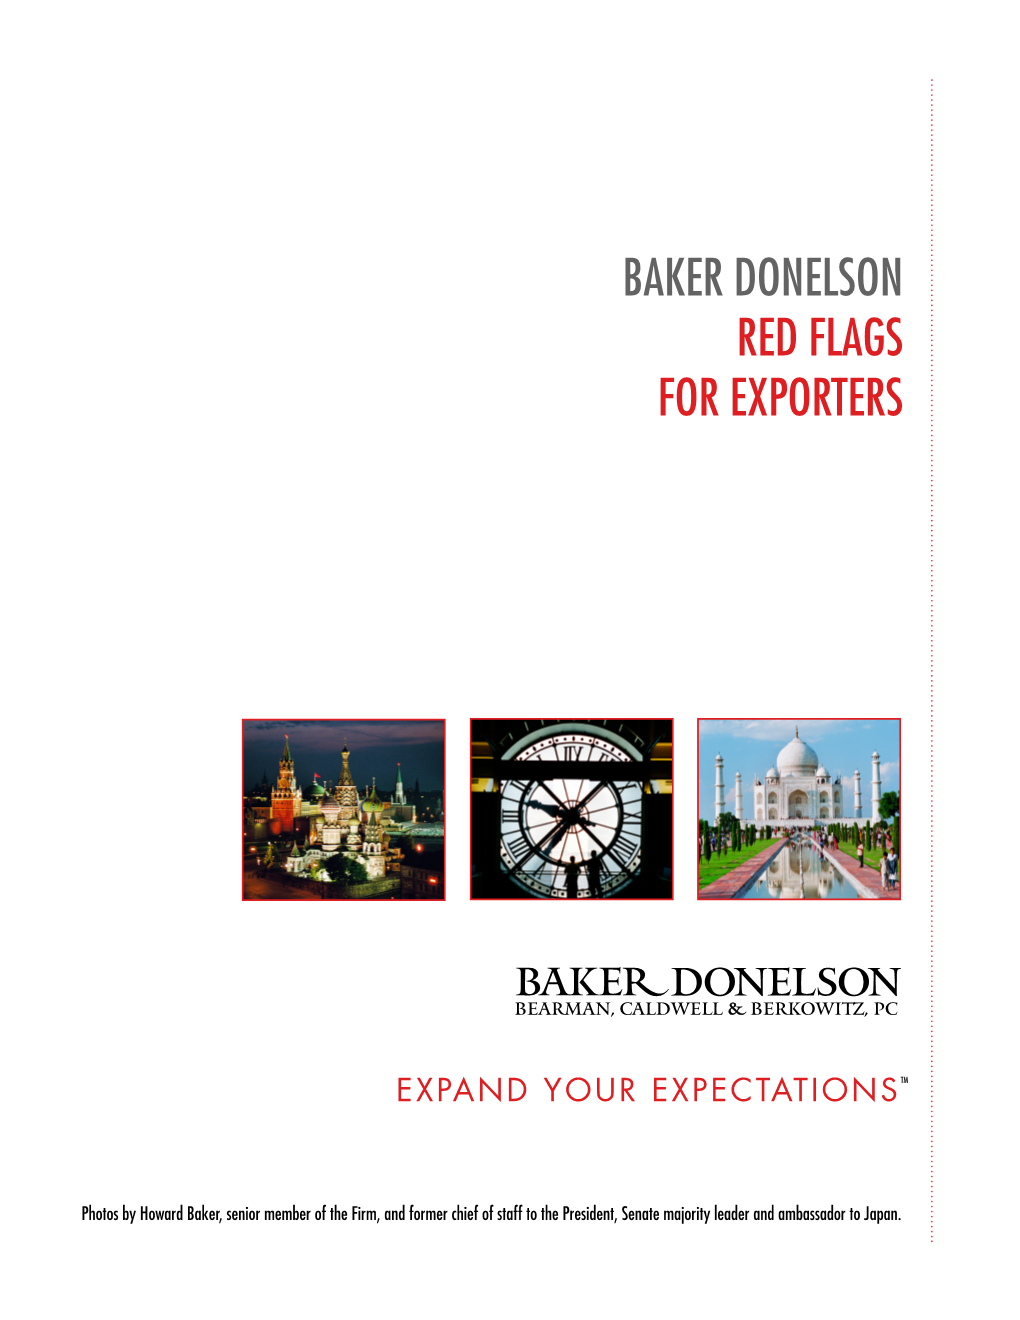 Baker Donelson Red Flags for Exporters